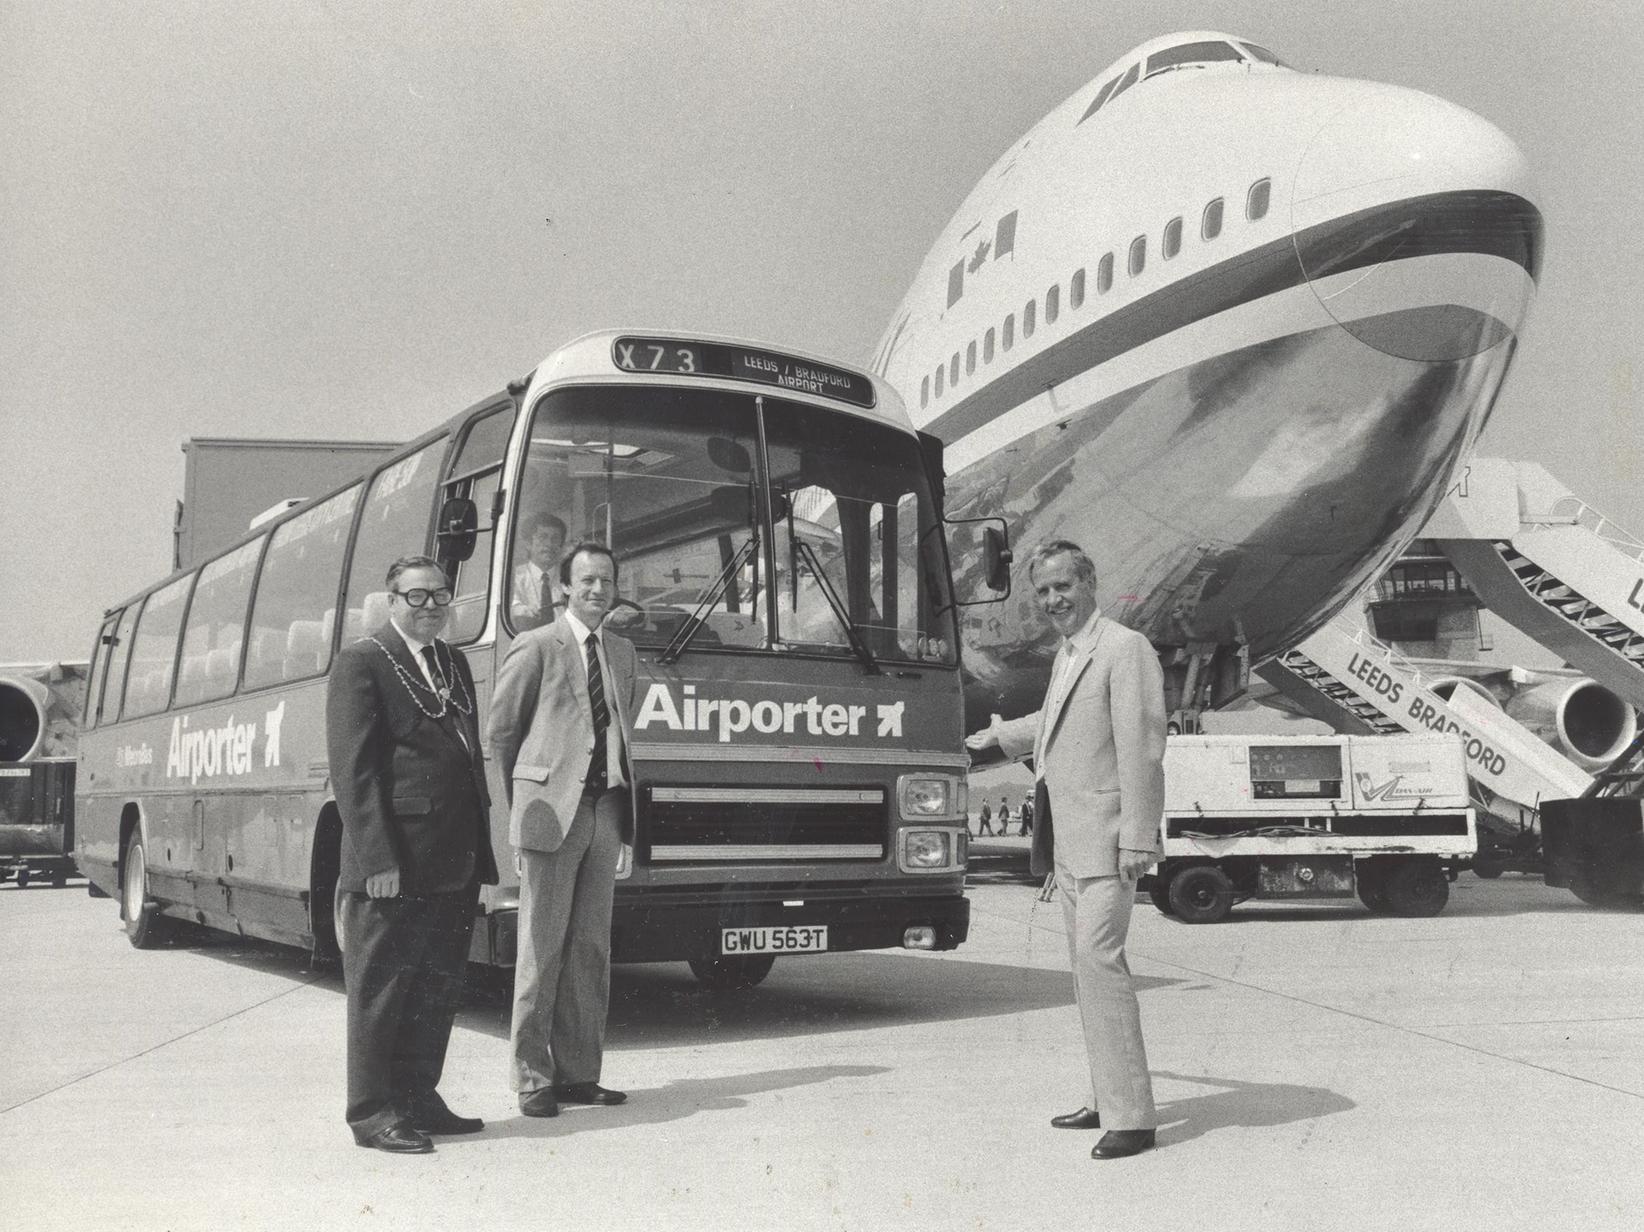 A new Airporter bus service was launched to link Leeds city centre with the airport.